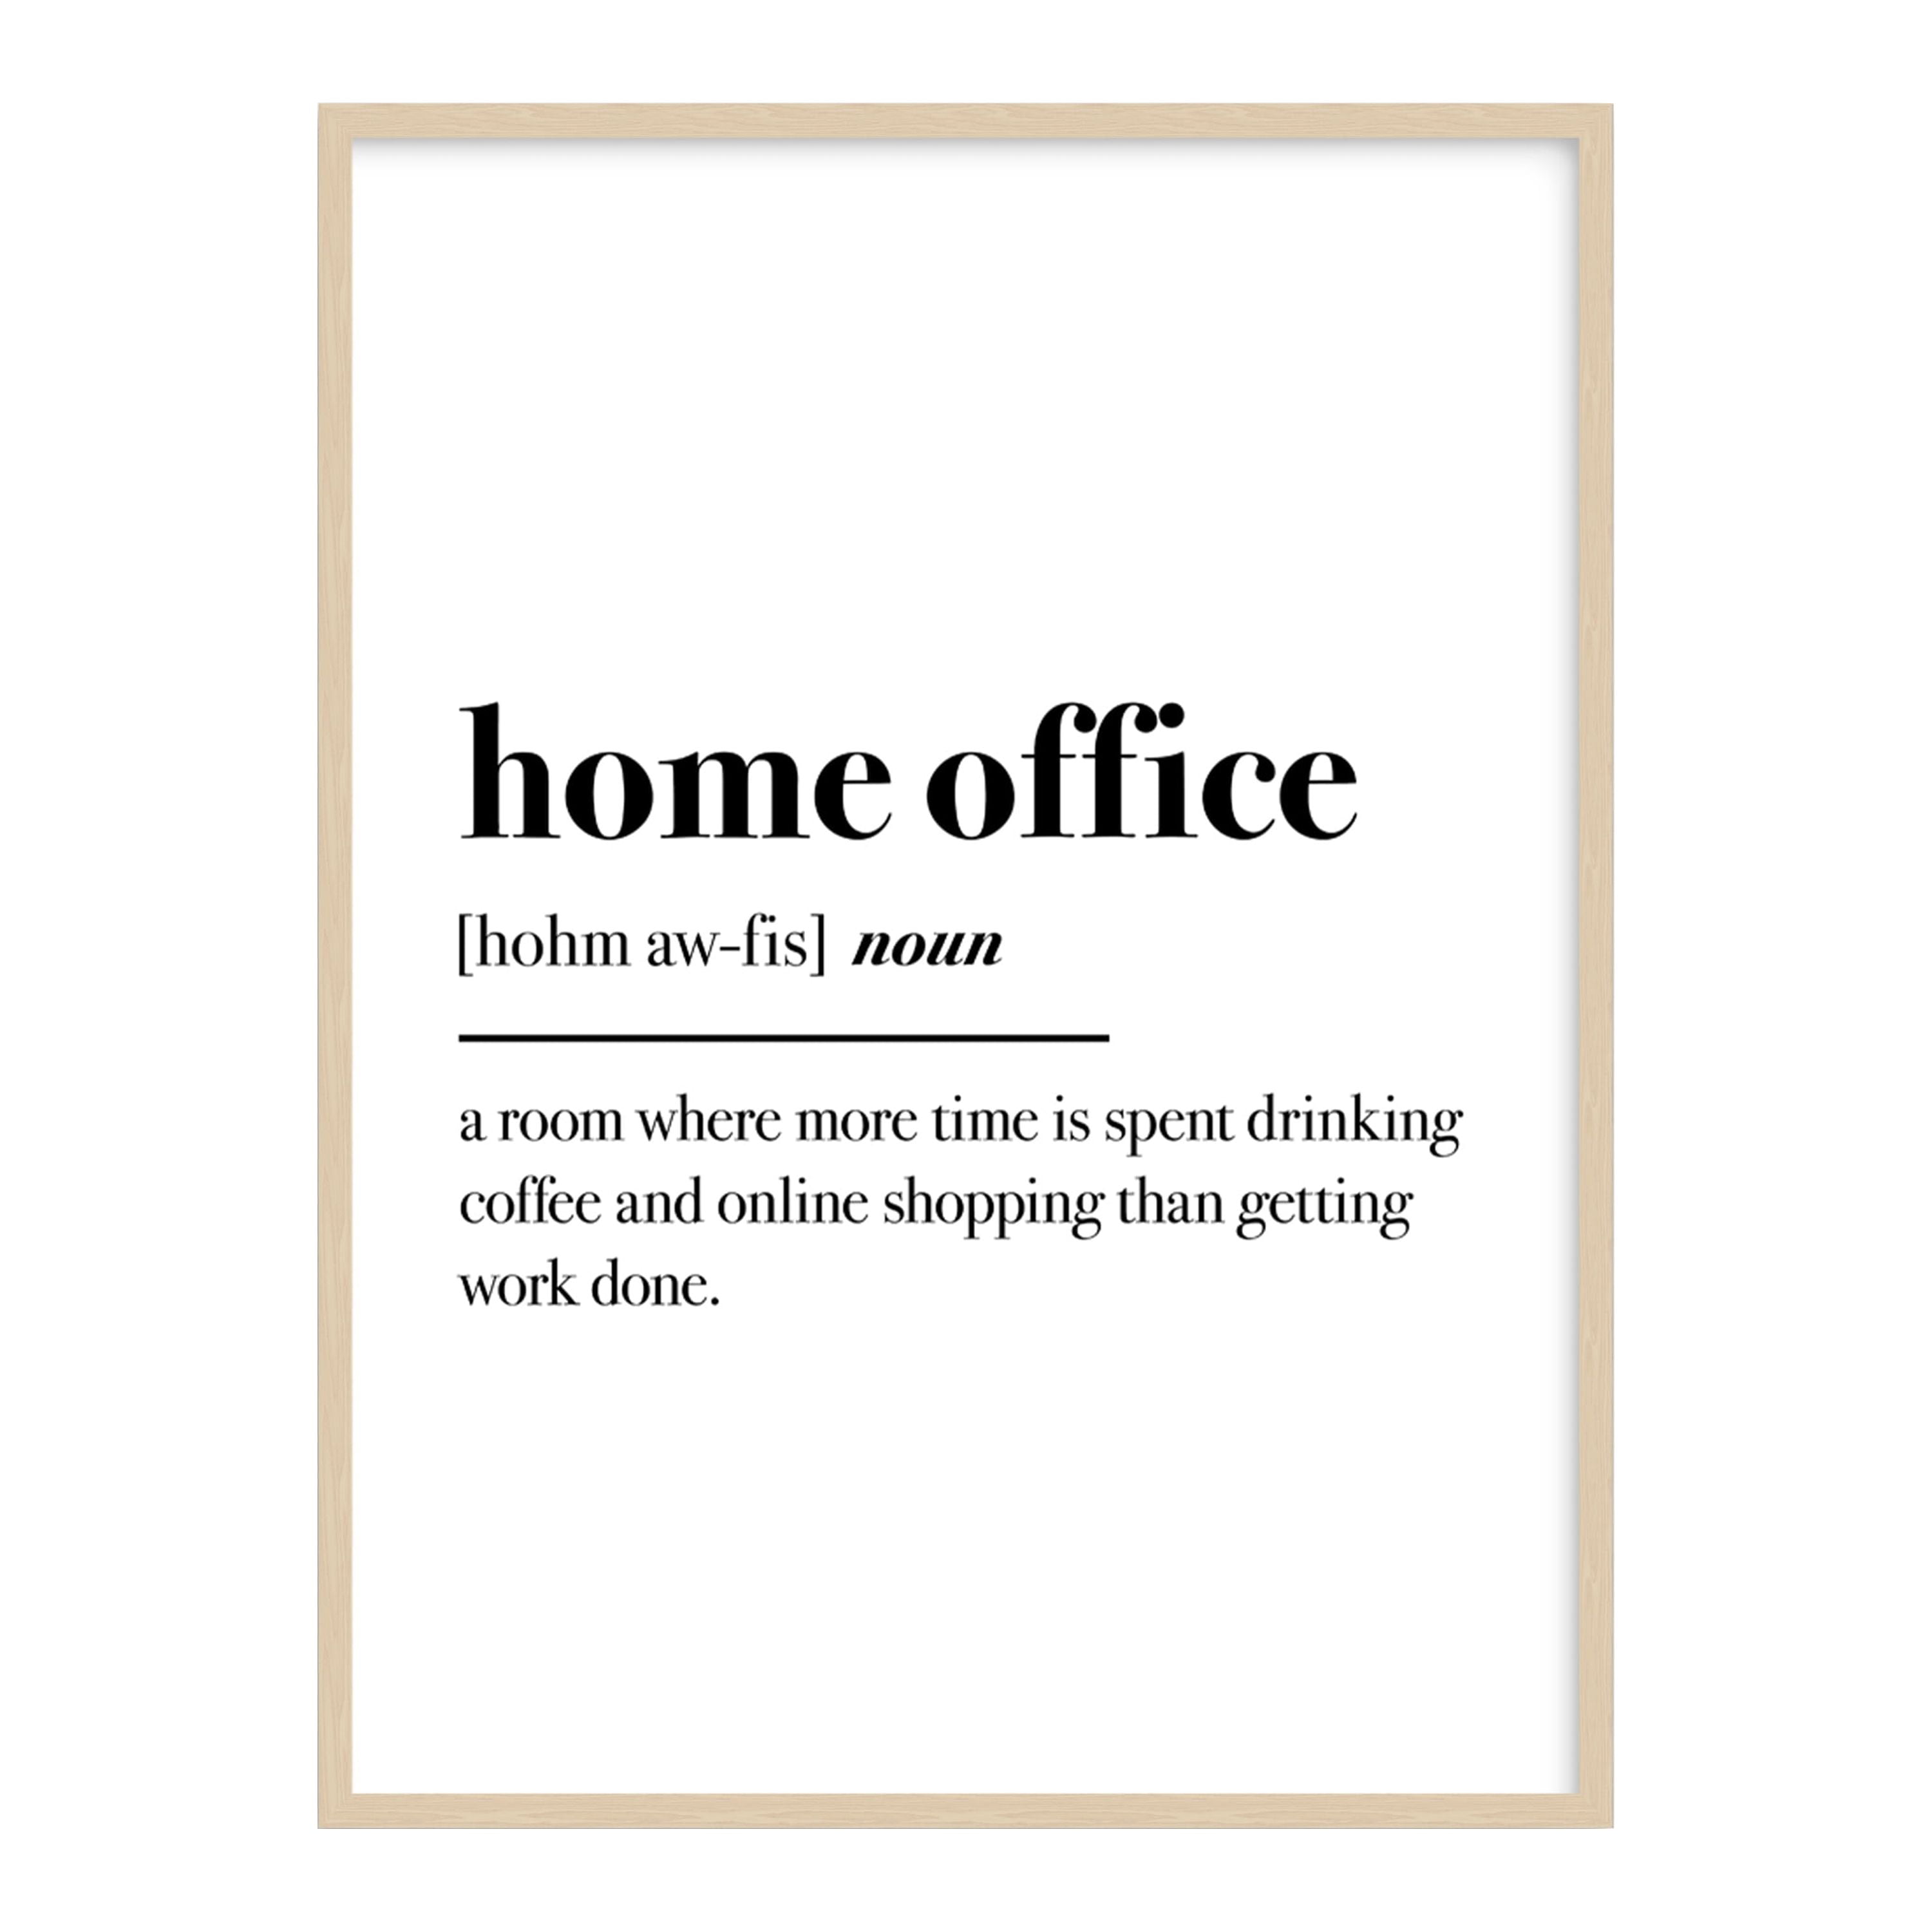 Haus and Hues Funny Quotes for Home Office Decor - Funny Home Decor & Office Wall Decor for Women Funny Work from Home Office Unframed 12x16